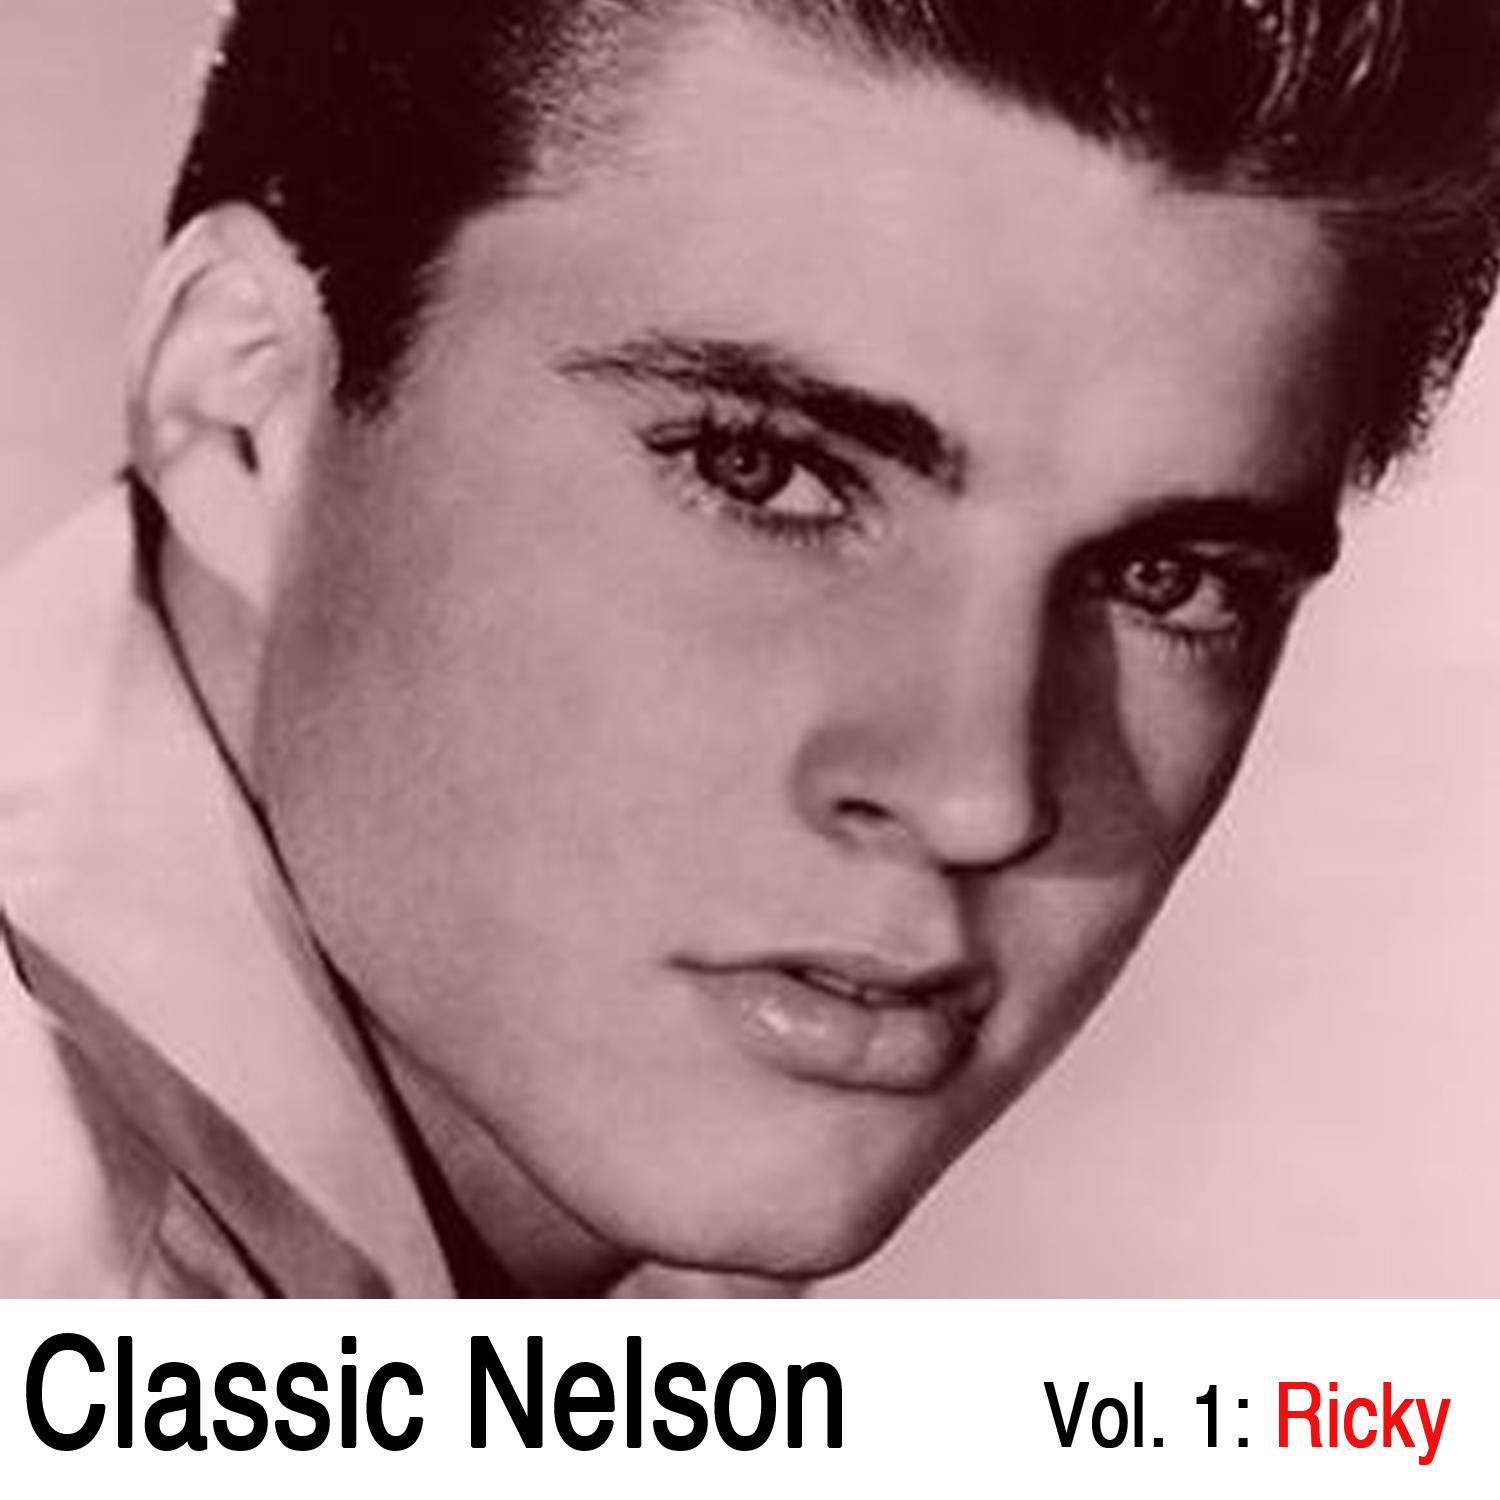 Classic Nelson, Vol. 1: Ricky